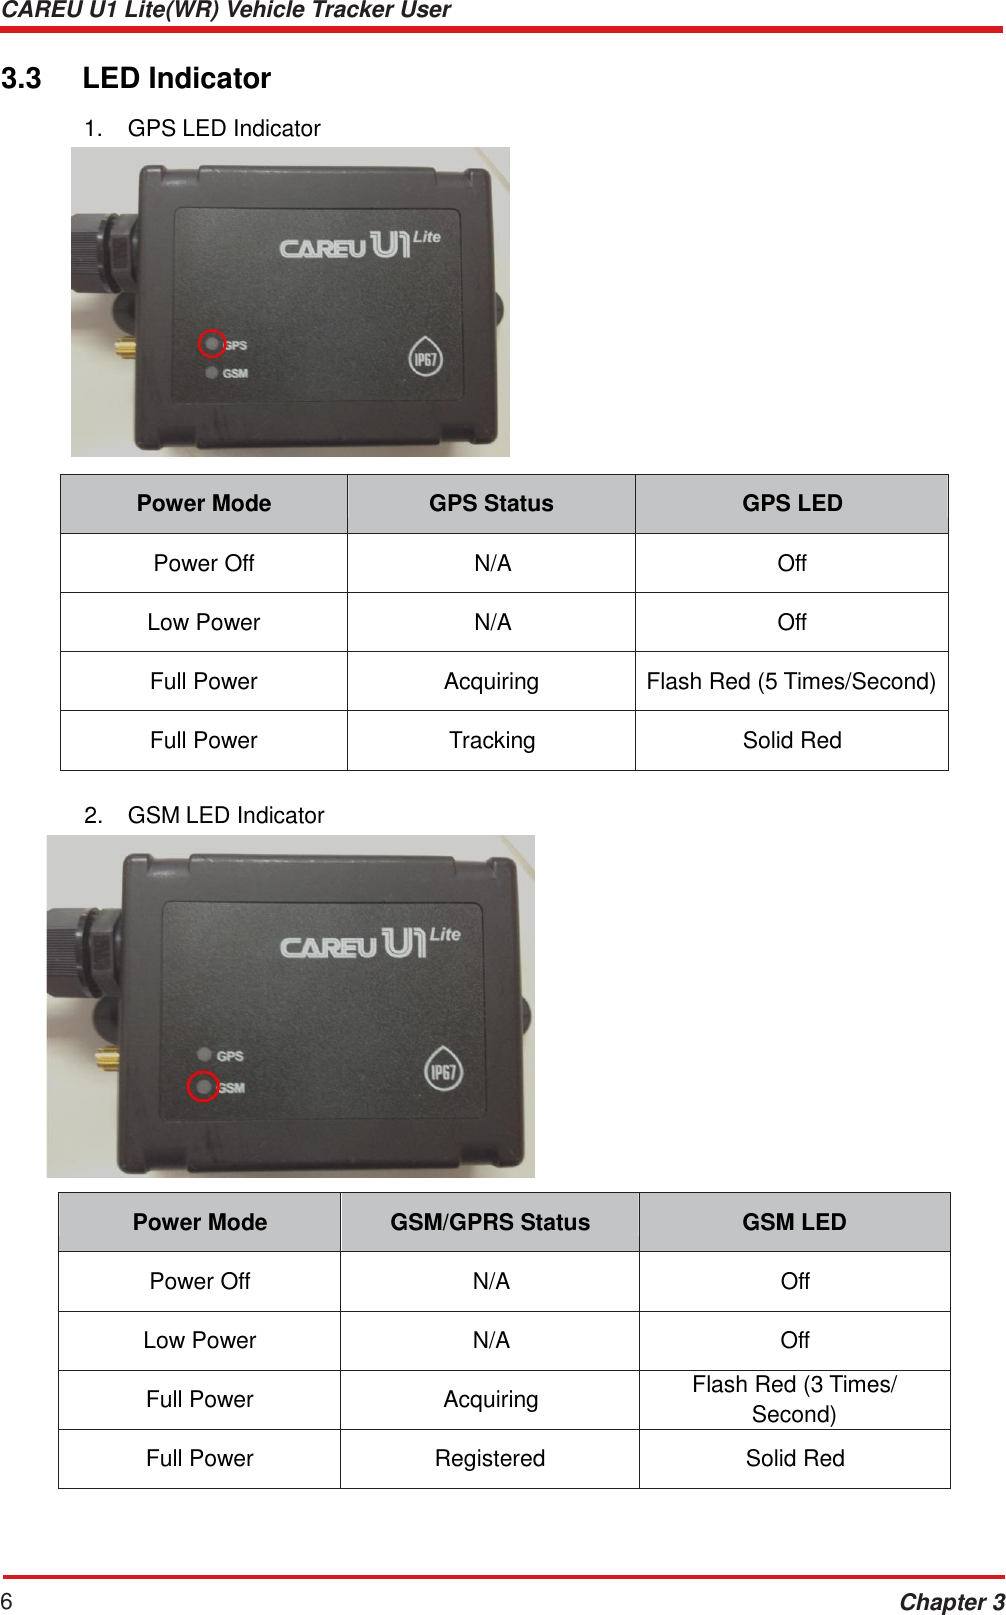 CAREU U1 Lite(WR) Vehicle Tracker User Guide 6 Chapter 3    3.3  LED Indicator  1.  GPS LED Indicator               Power Mode  GPS Status  GPS LED  Power Off  N/A  Off  Low Power  N/A  Off  Full Power  Acquiring  Flash Red (5 Times/Second)  Full Power  Tracking  Solid Red  2.  GSM LED Indicator                   Power Mode  GSM/GPRS Status  GSM LED  Power Off  N/A  Off  Low Power  N/A  Off  Full Power  Acquiring Flash Red (3 Times/ Second)  Full Power  Registered  Solid Red 